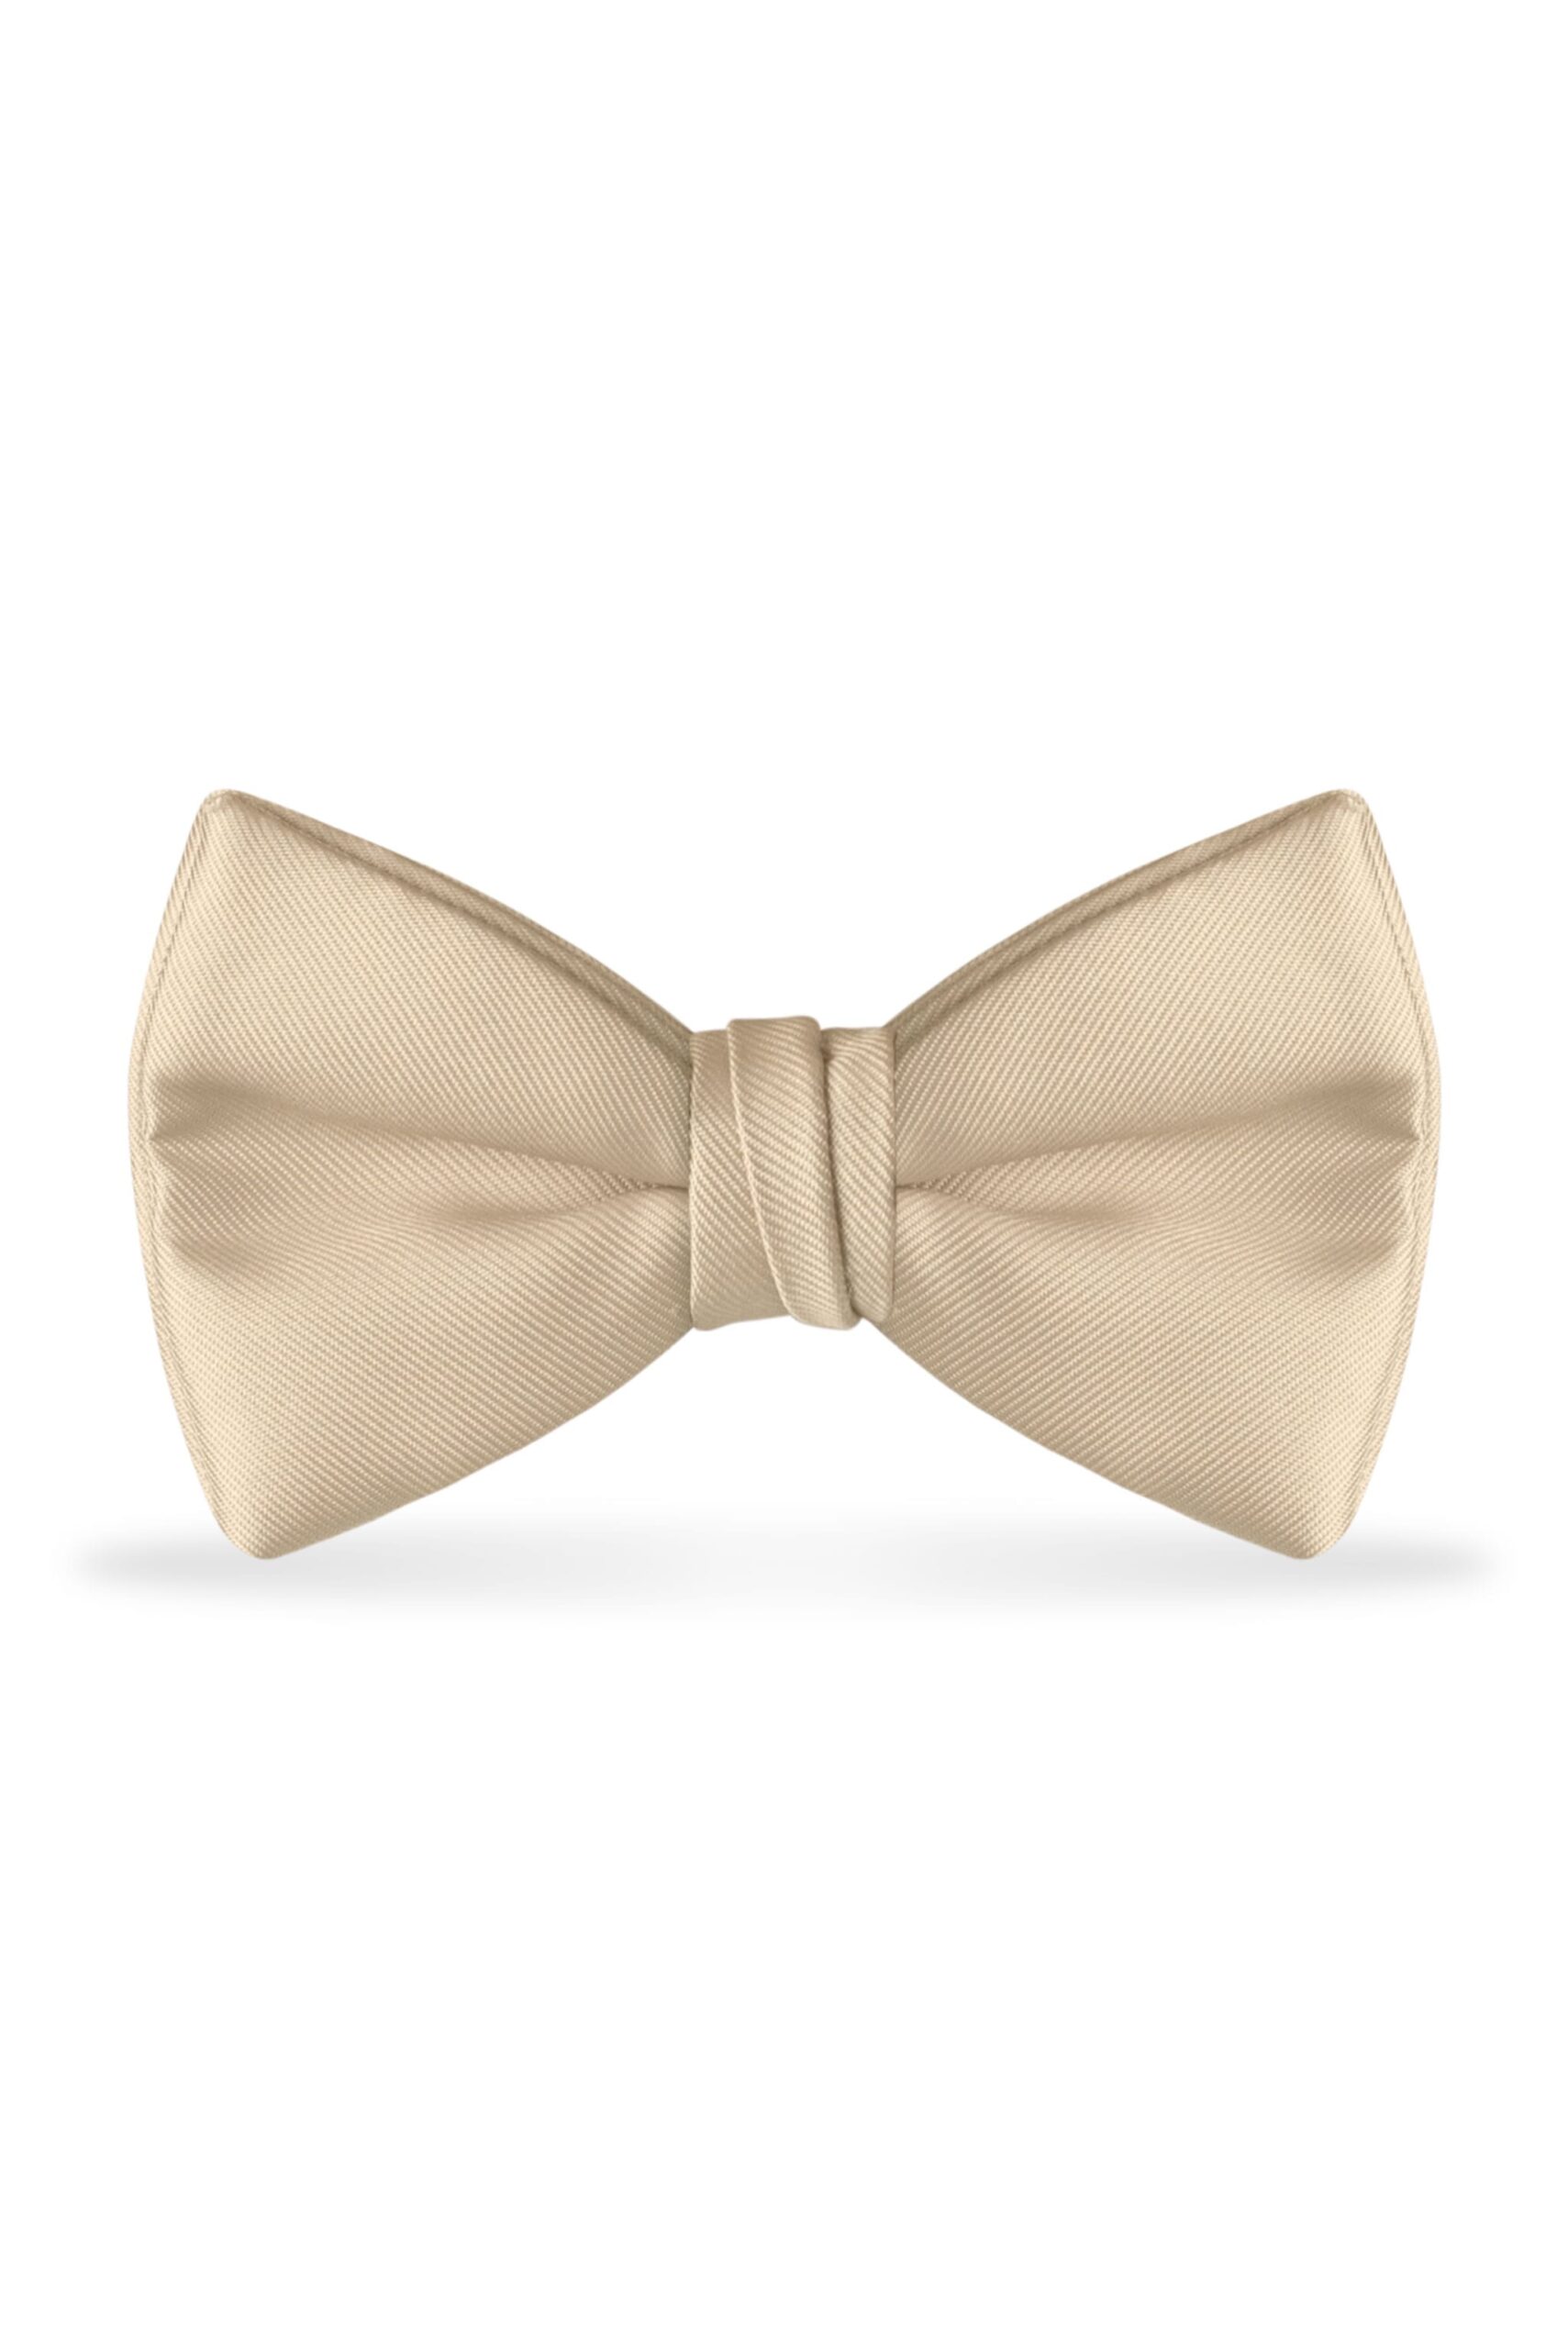 Solid Champagne Bow Tie